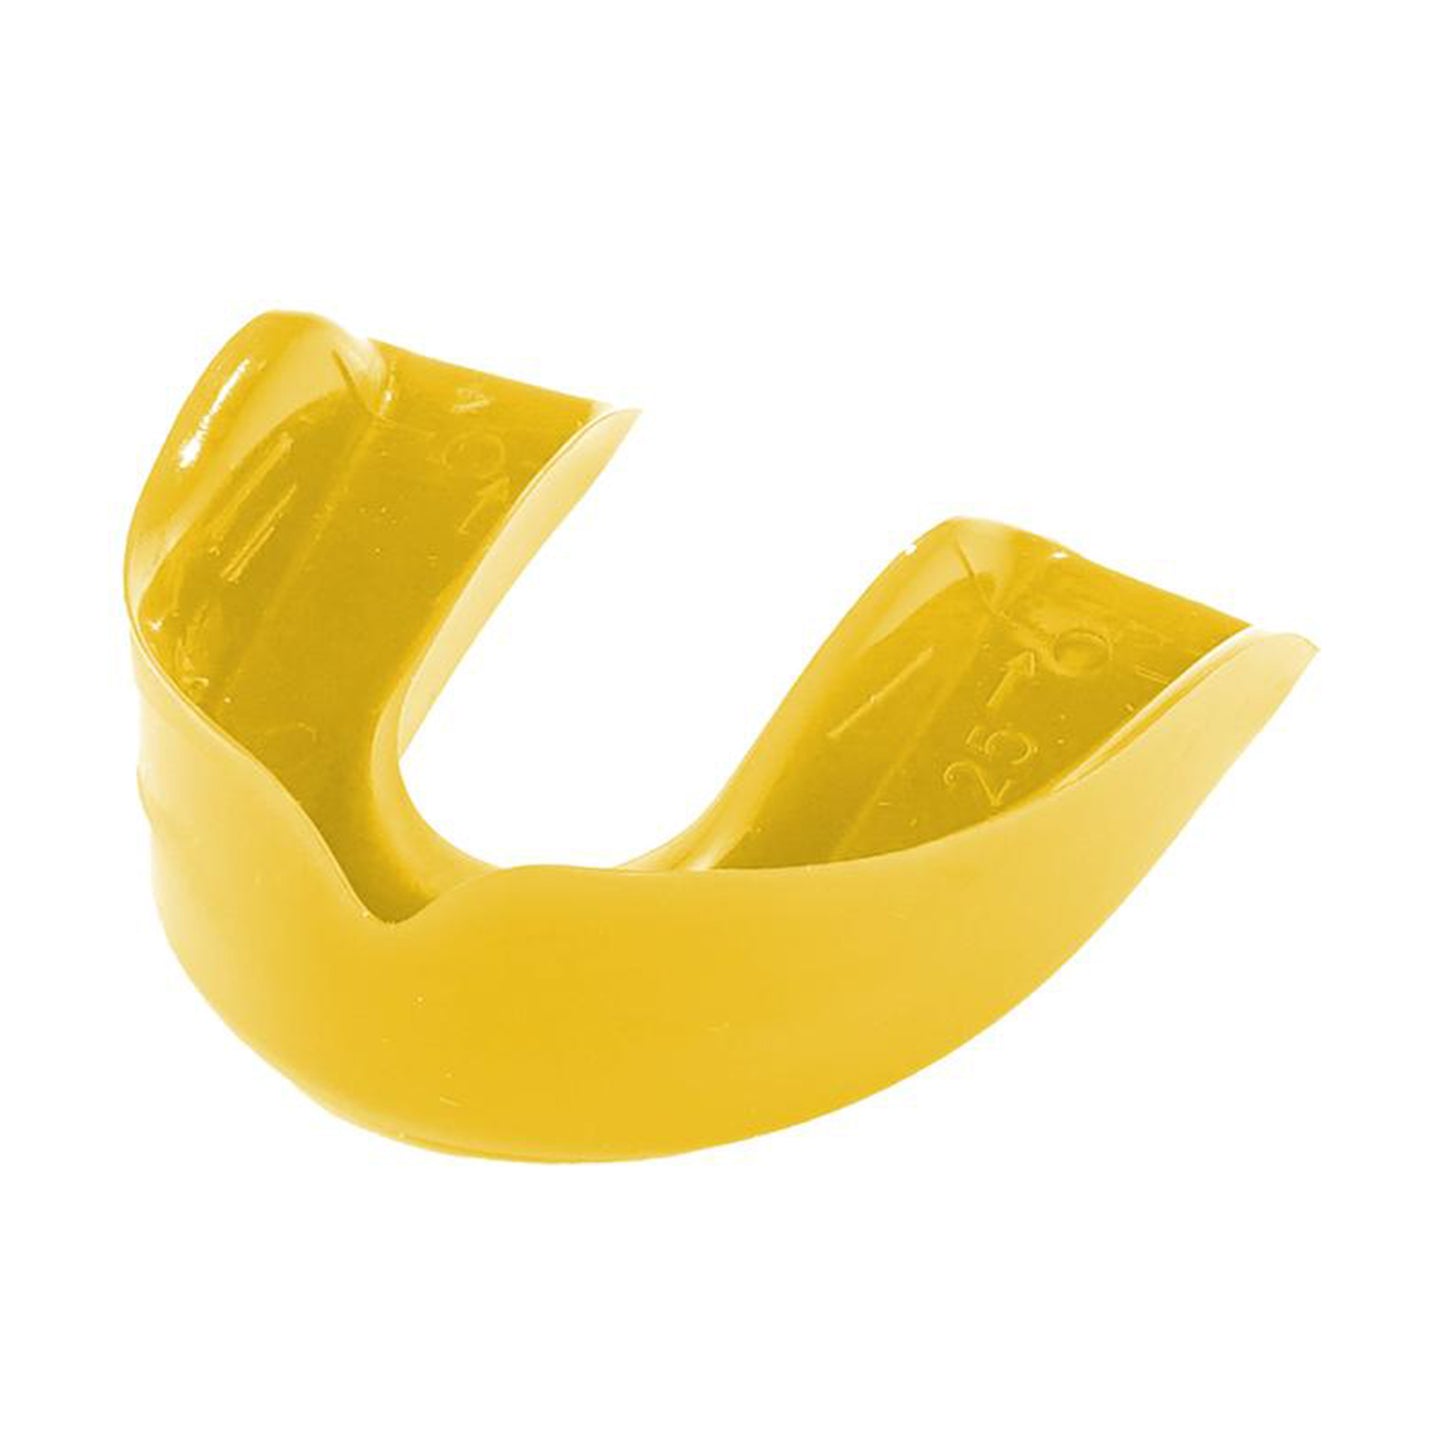 Wilson Single Density Adult Mouth Guard In Yellow - 10 Units - USA Supply